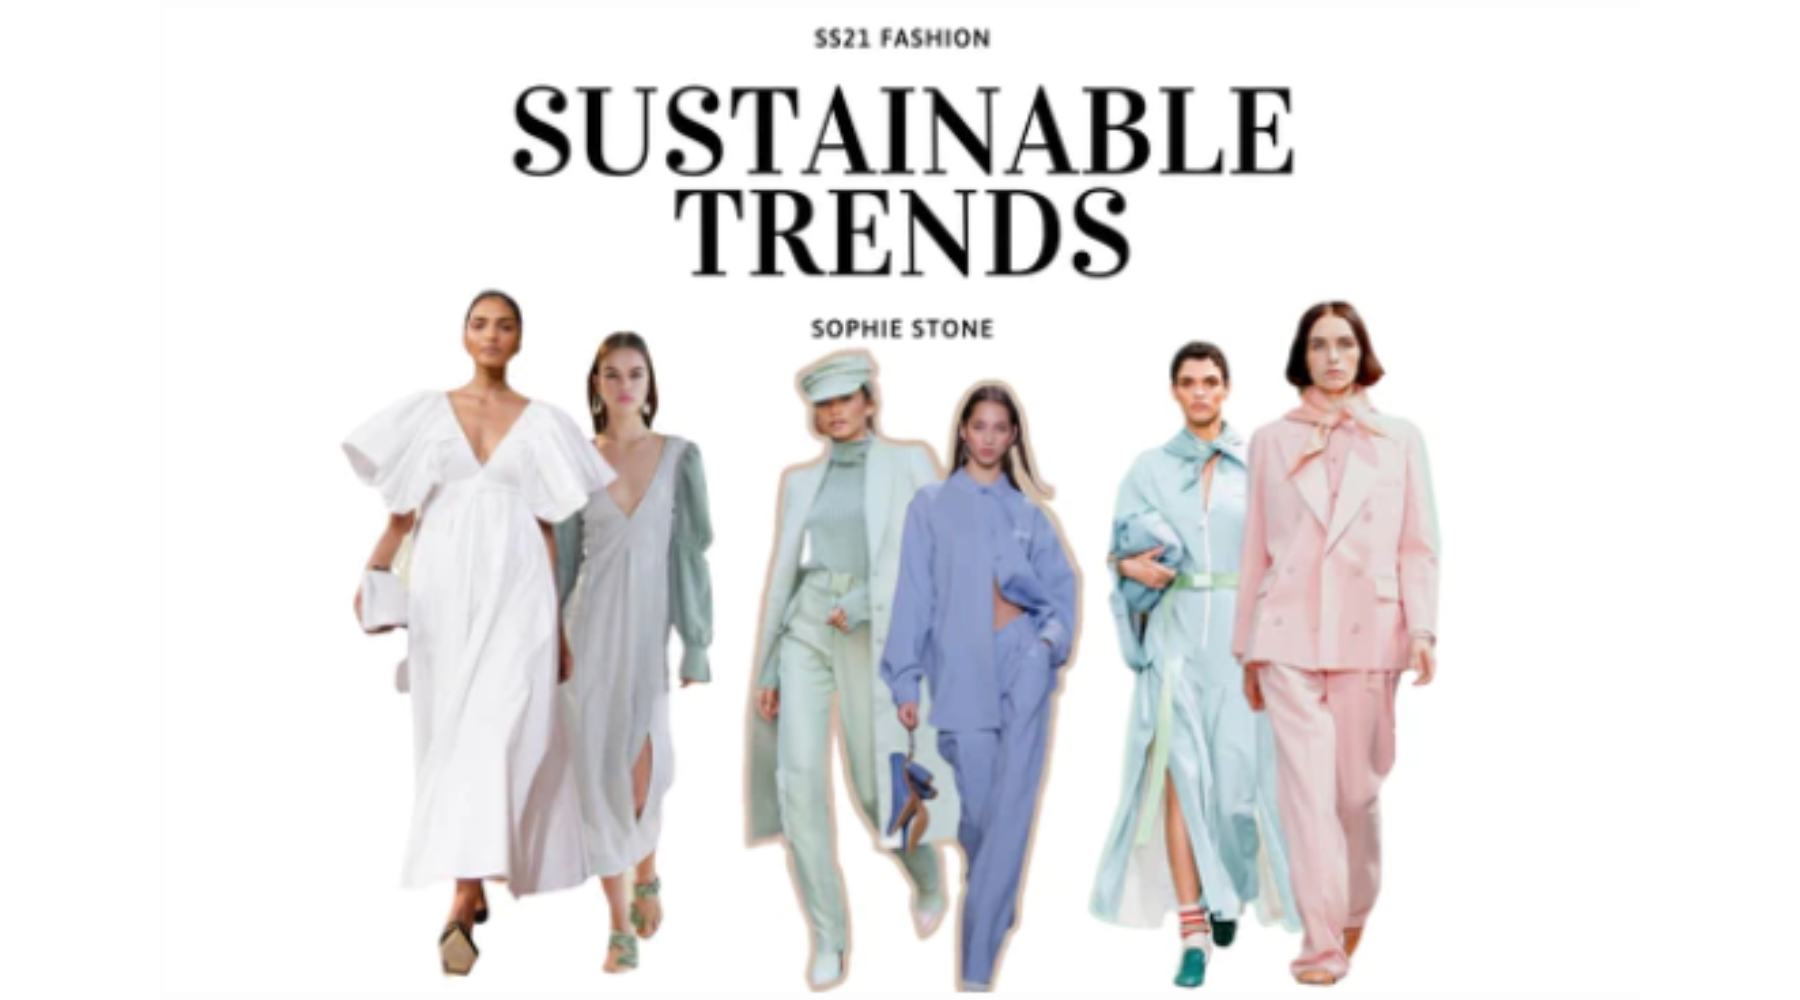 Sustainable trends for Spring/Summer '21